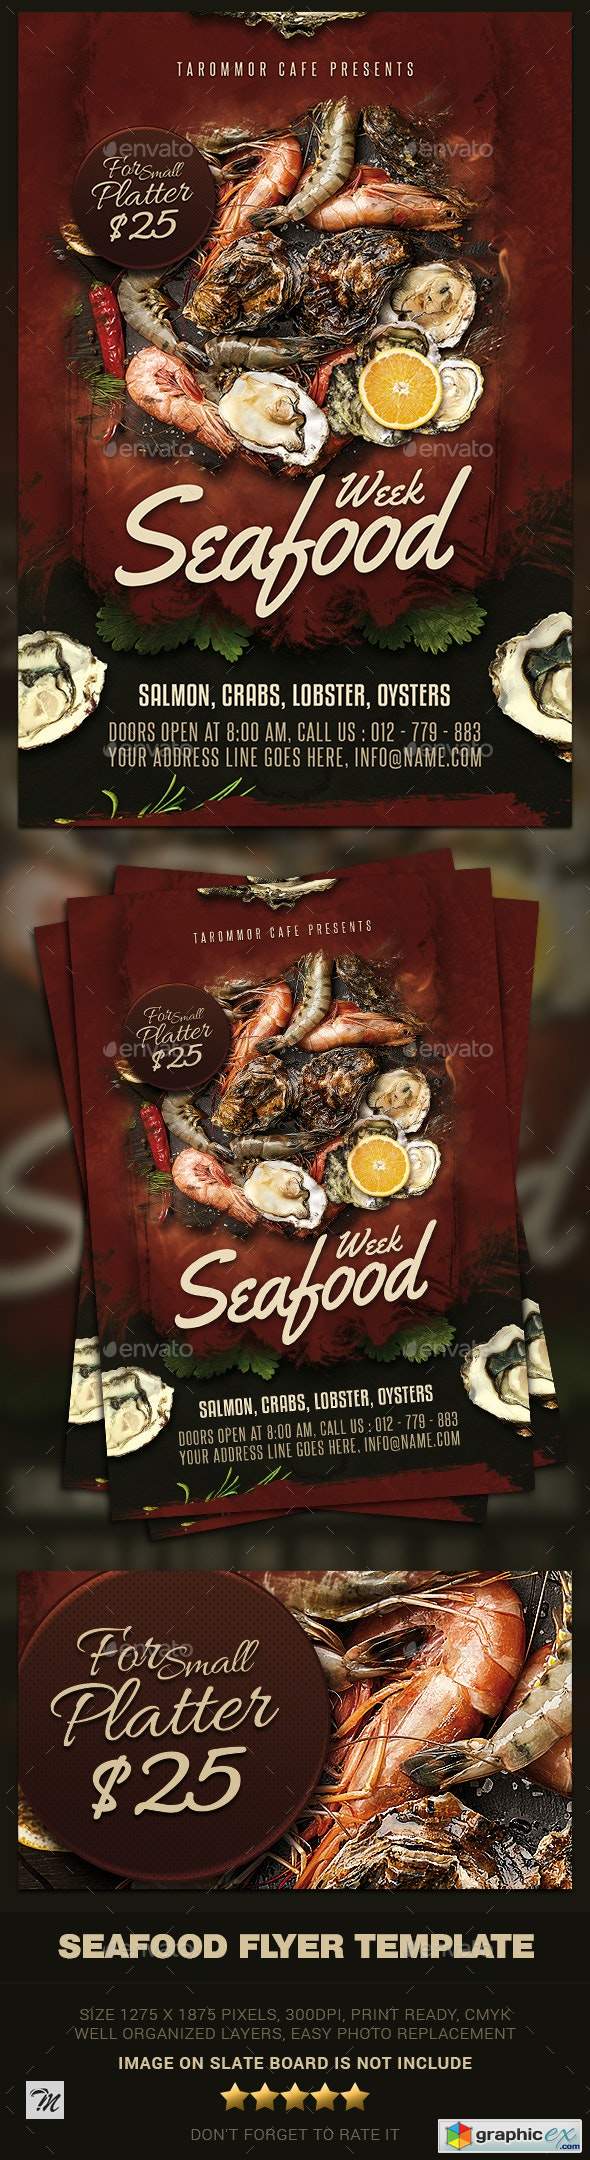 Seafood Flyer Template